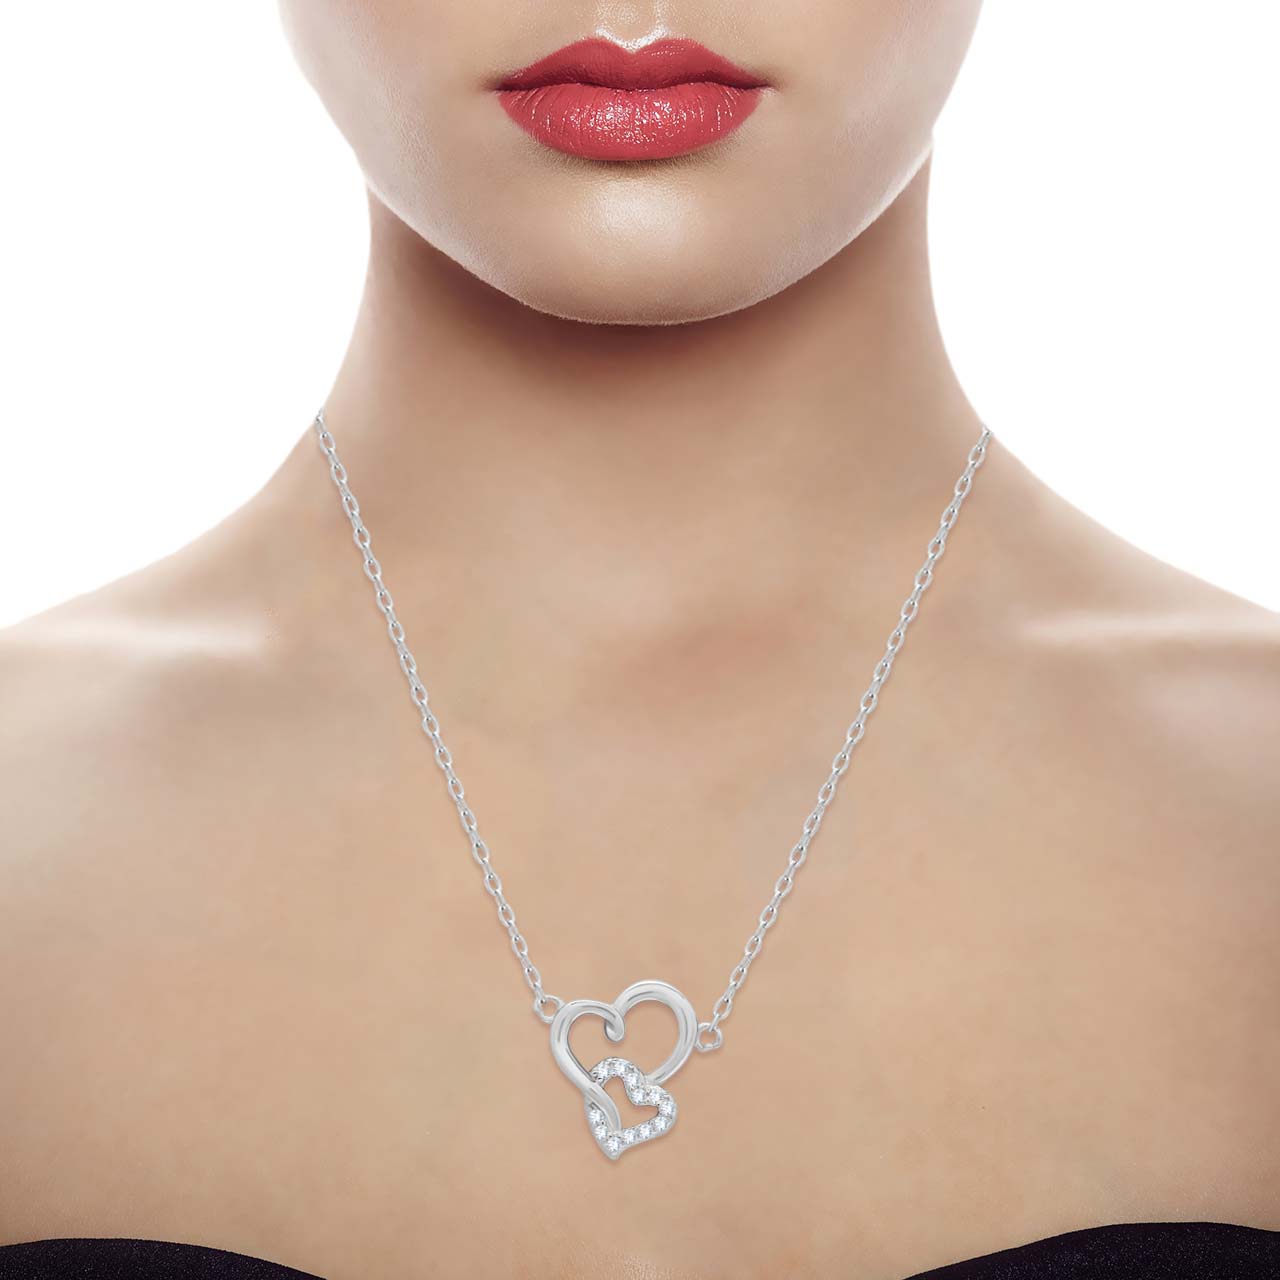 Forever Together Silver Heart Pendant